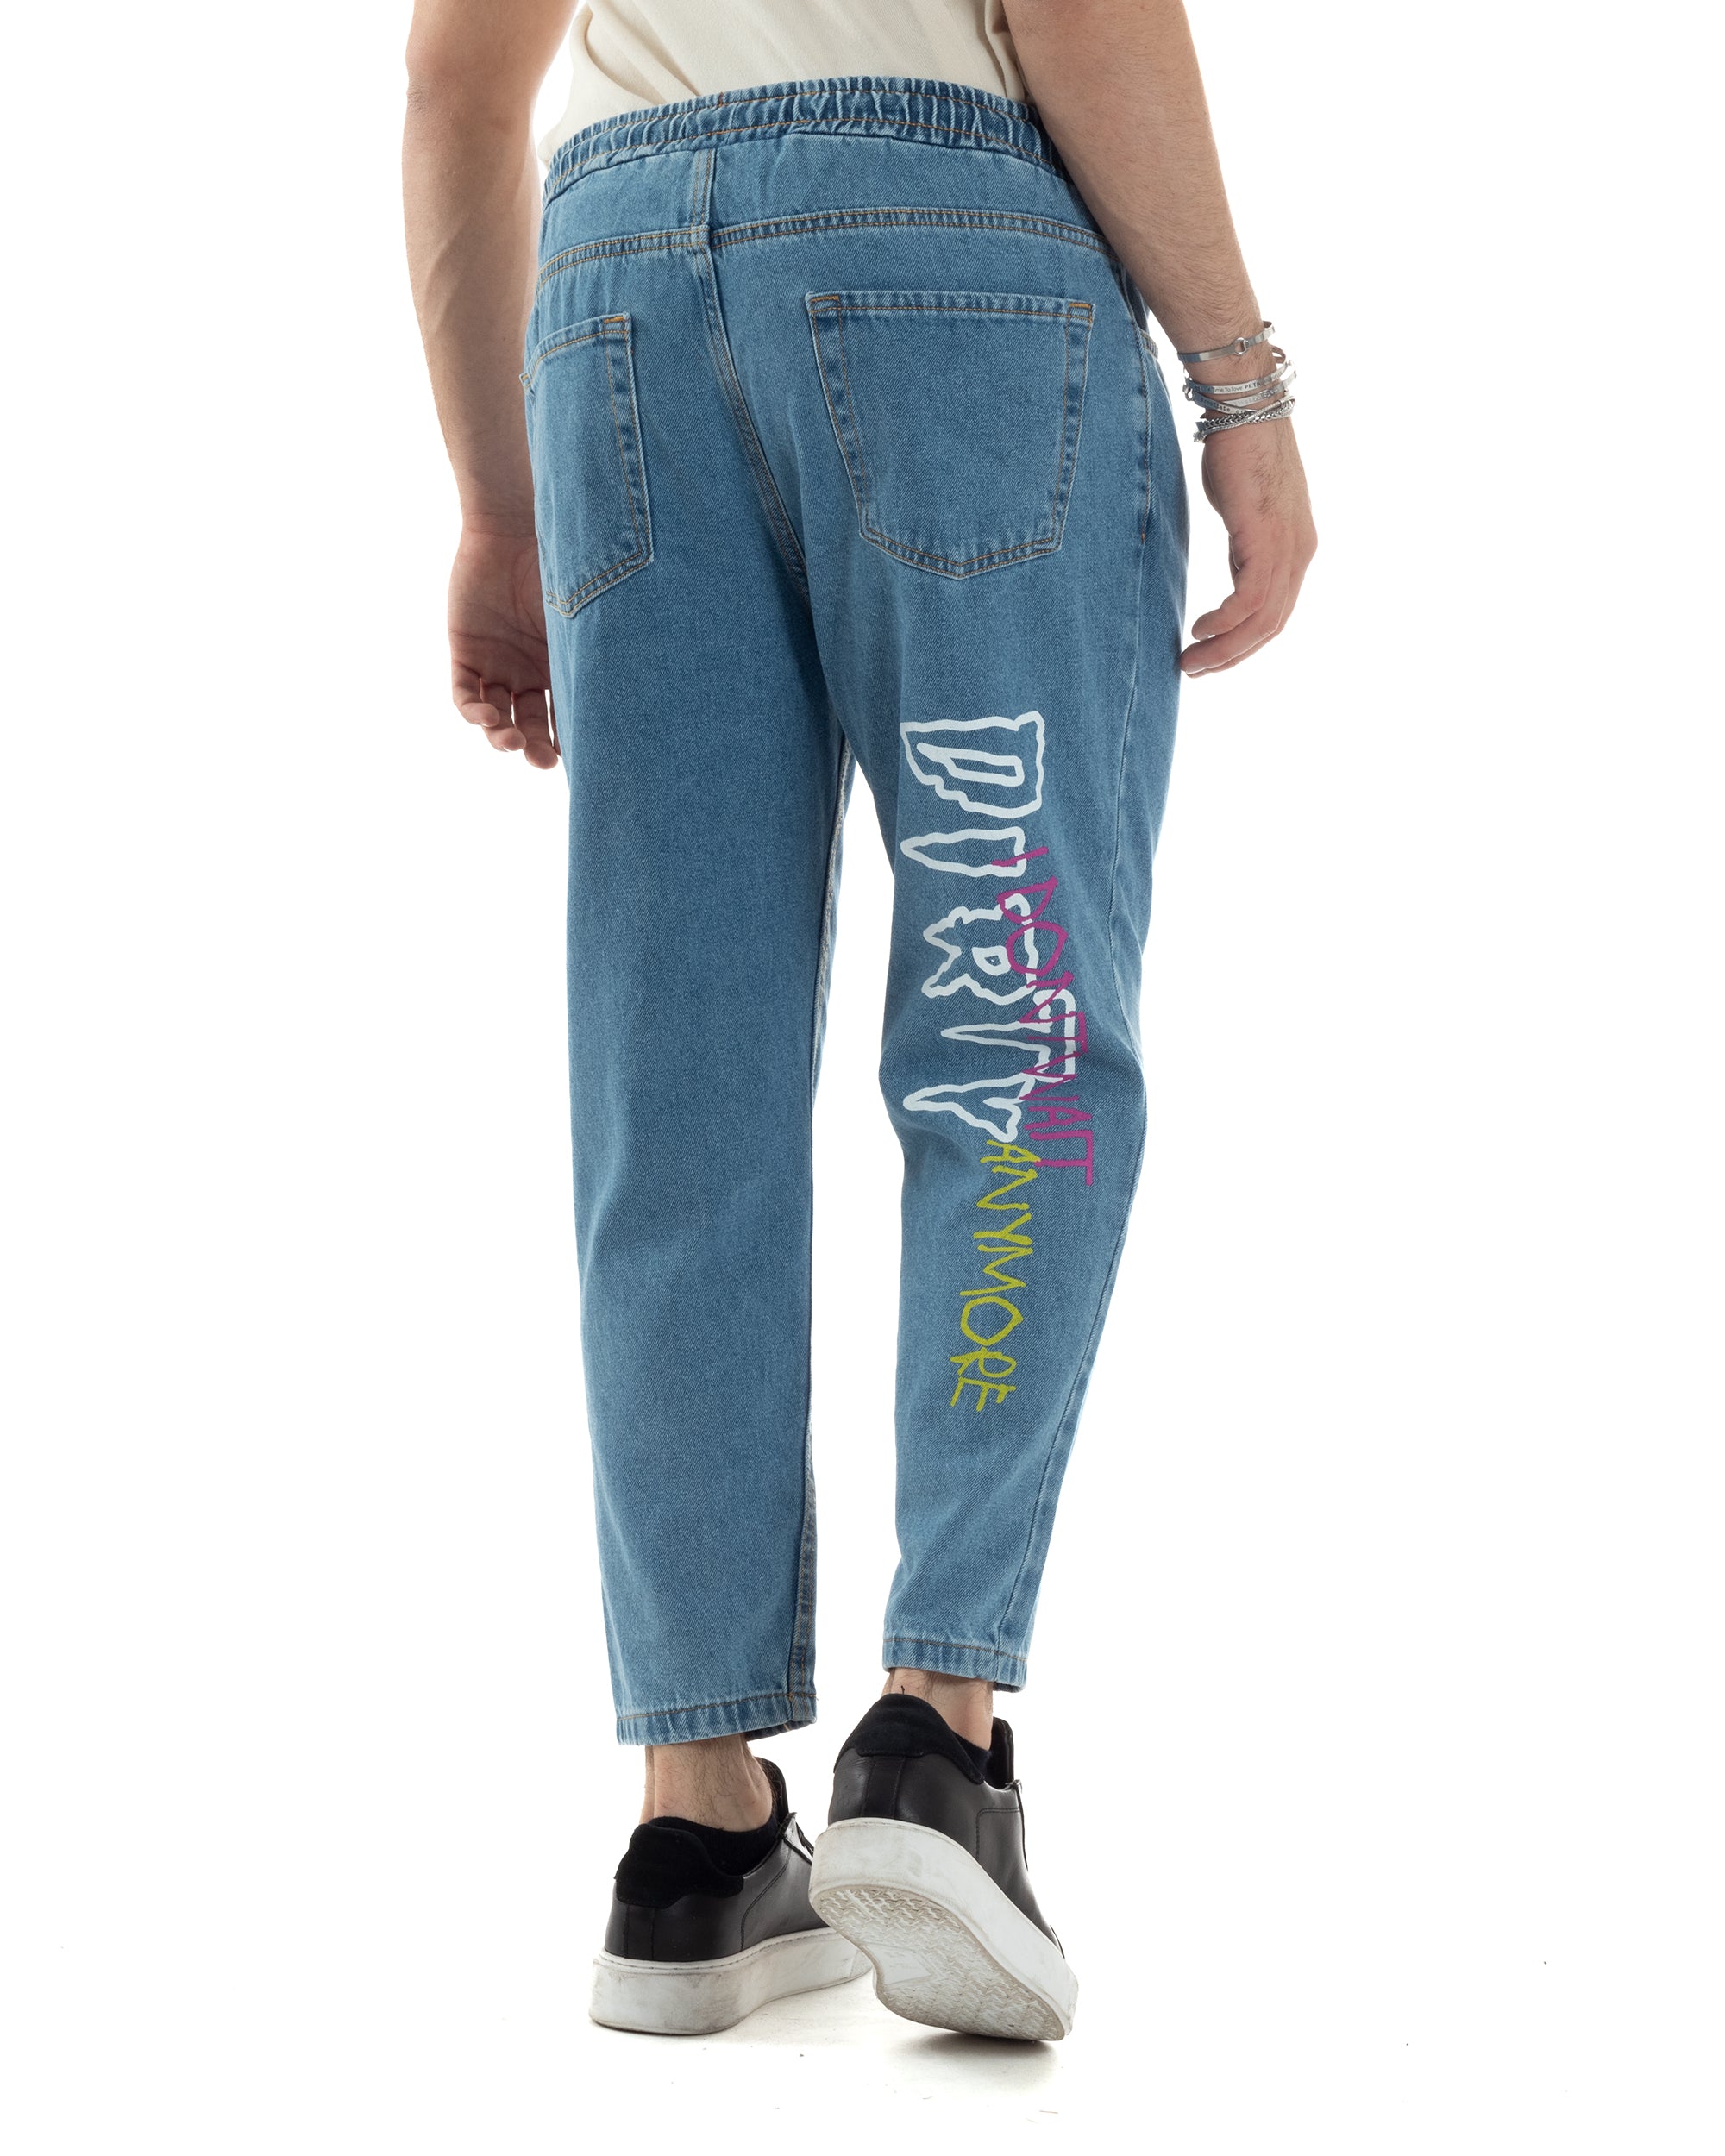 Men's Jeans Trousers Loose Fit Light Denim Basic Simple Casual Trousers GIOSAL-P4081A